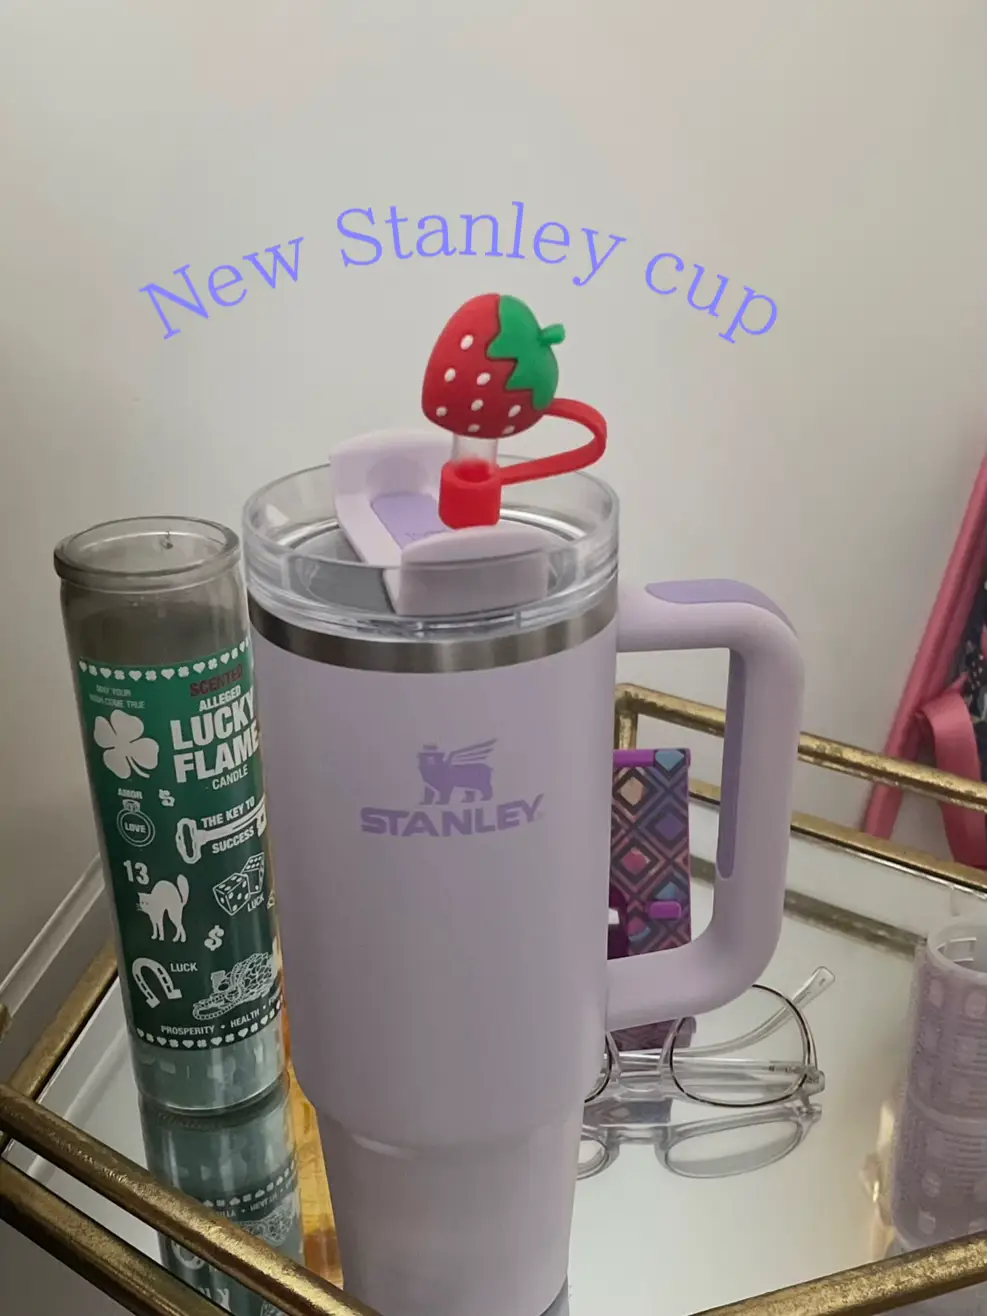 New Stanley Cup Pink 🌸, Gallery posted by Caroline